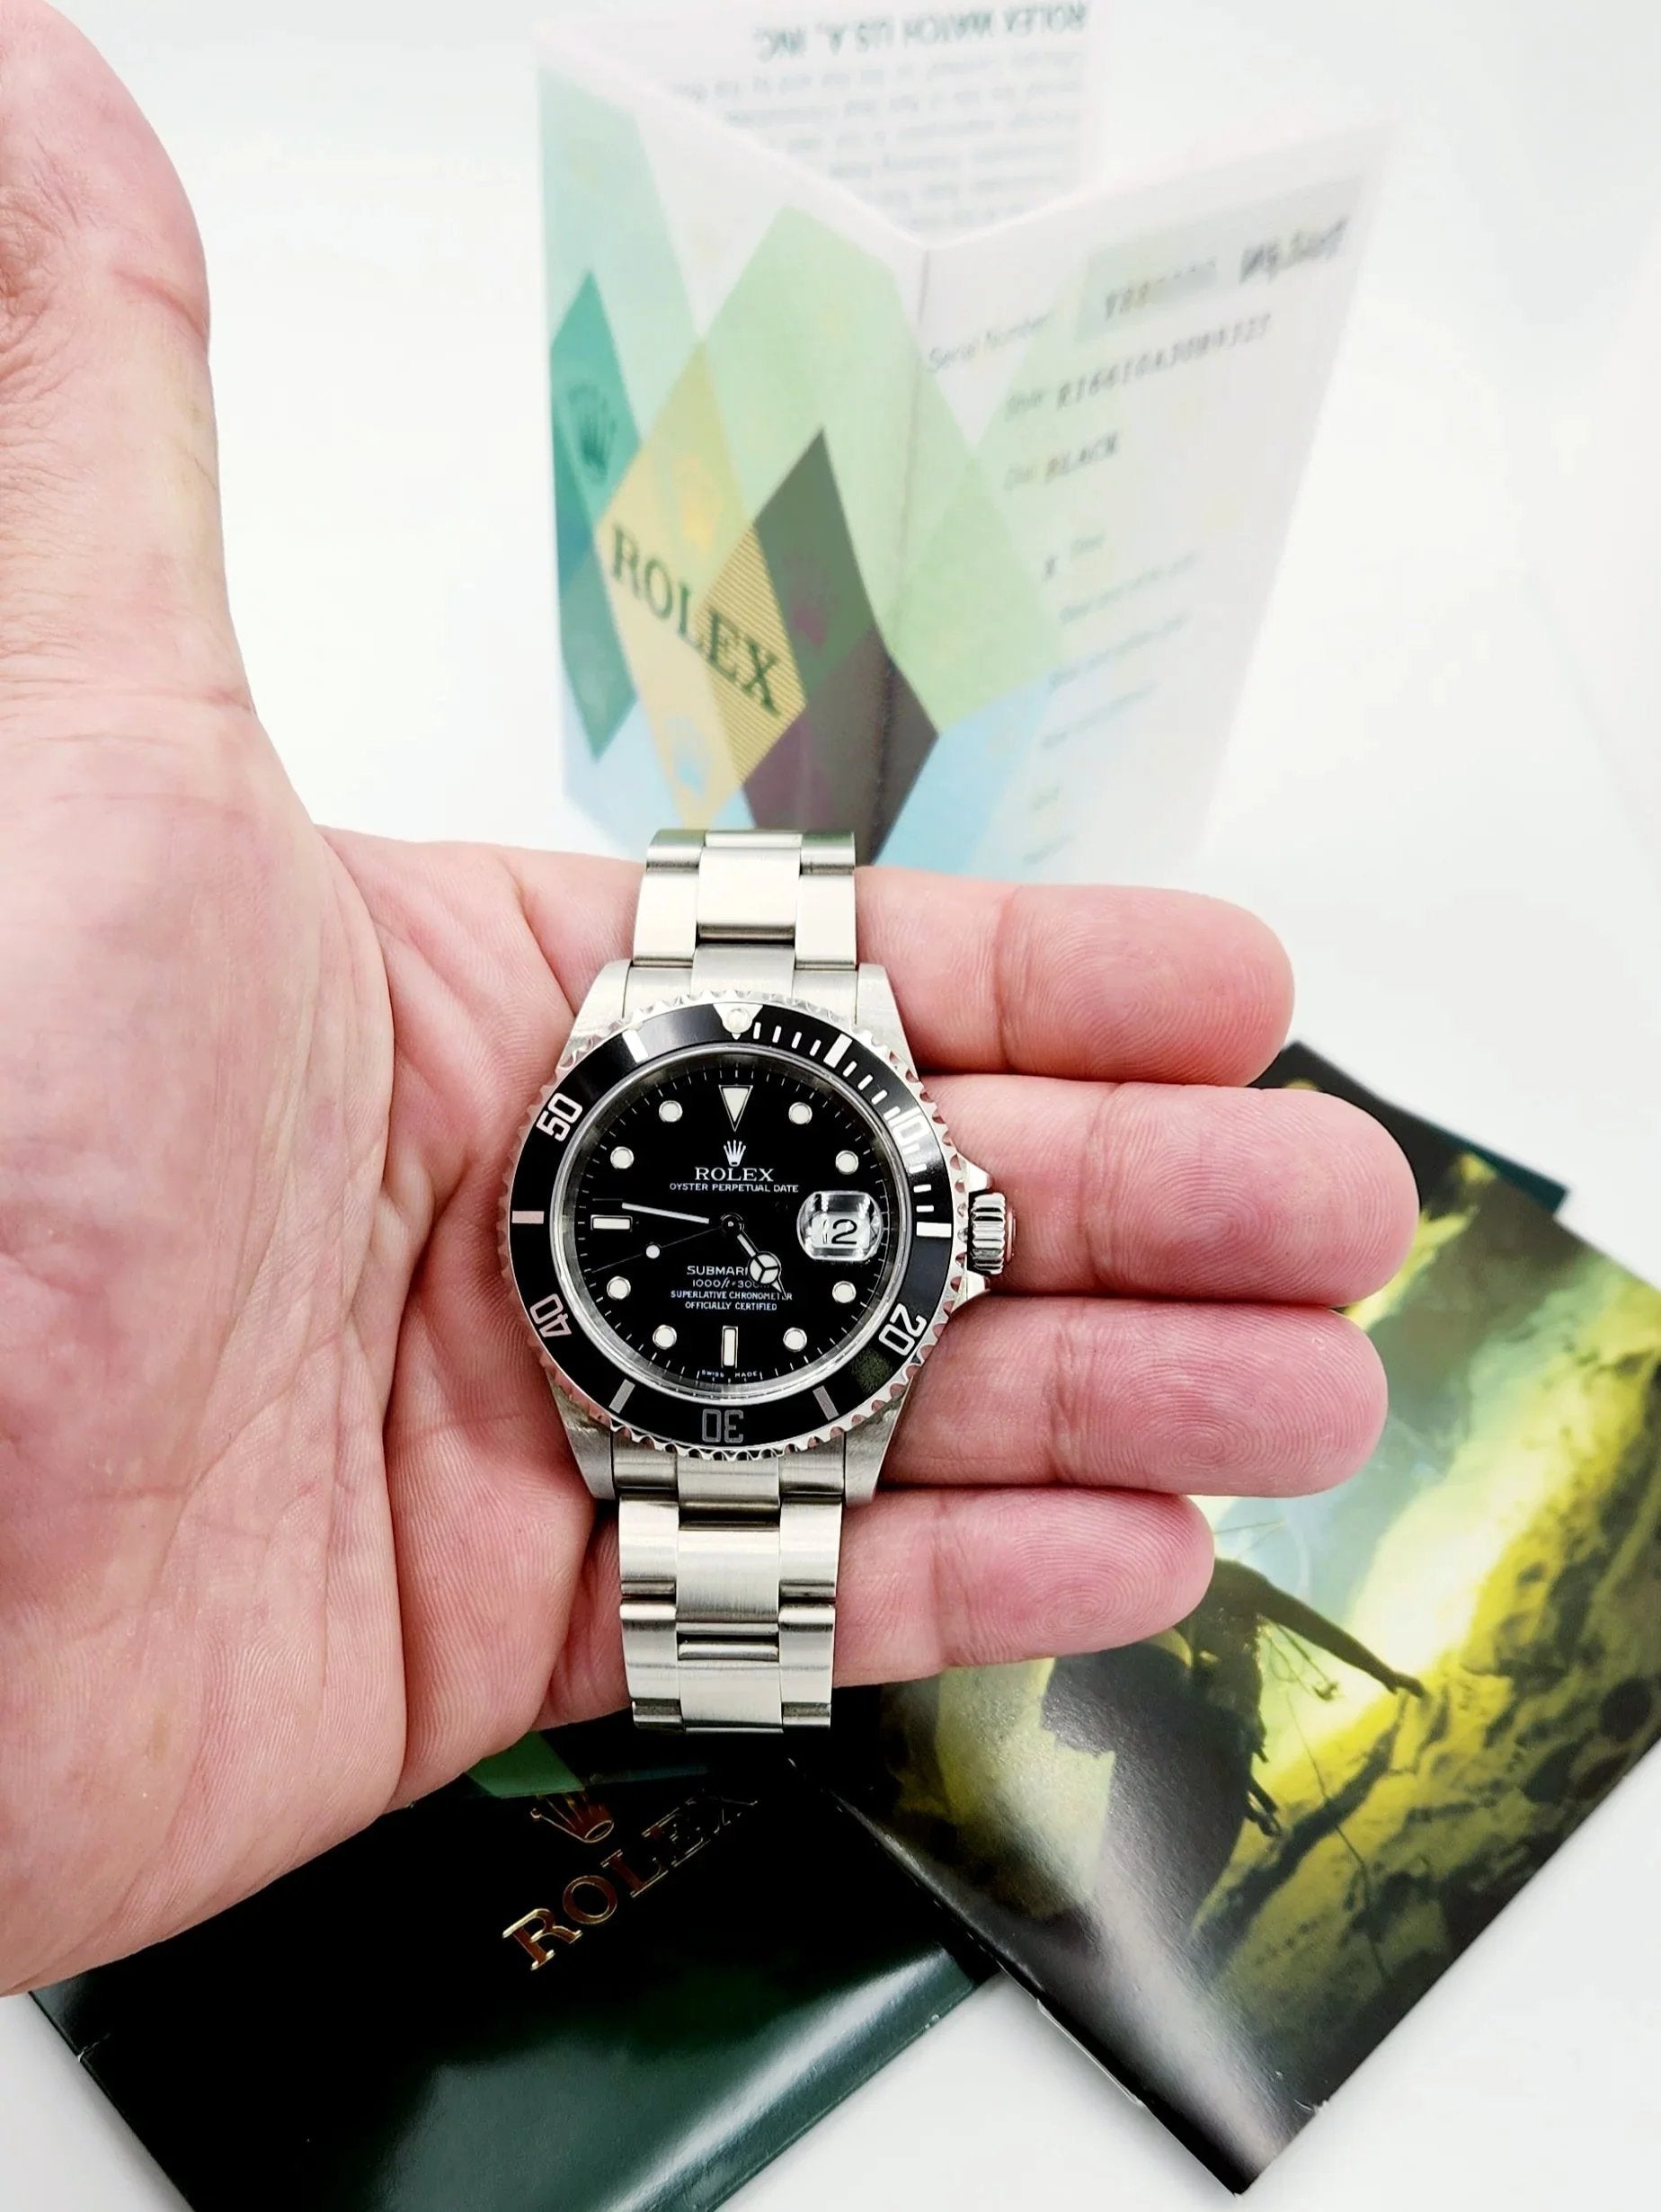 Men's Rolex 40mm Submariner Oyster Perpetual Date Stainless Steel Watch with Black Dial and Black Bezel. (Pre-Owned 16610)